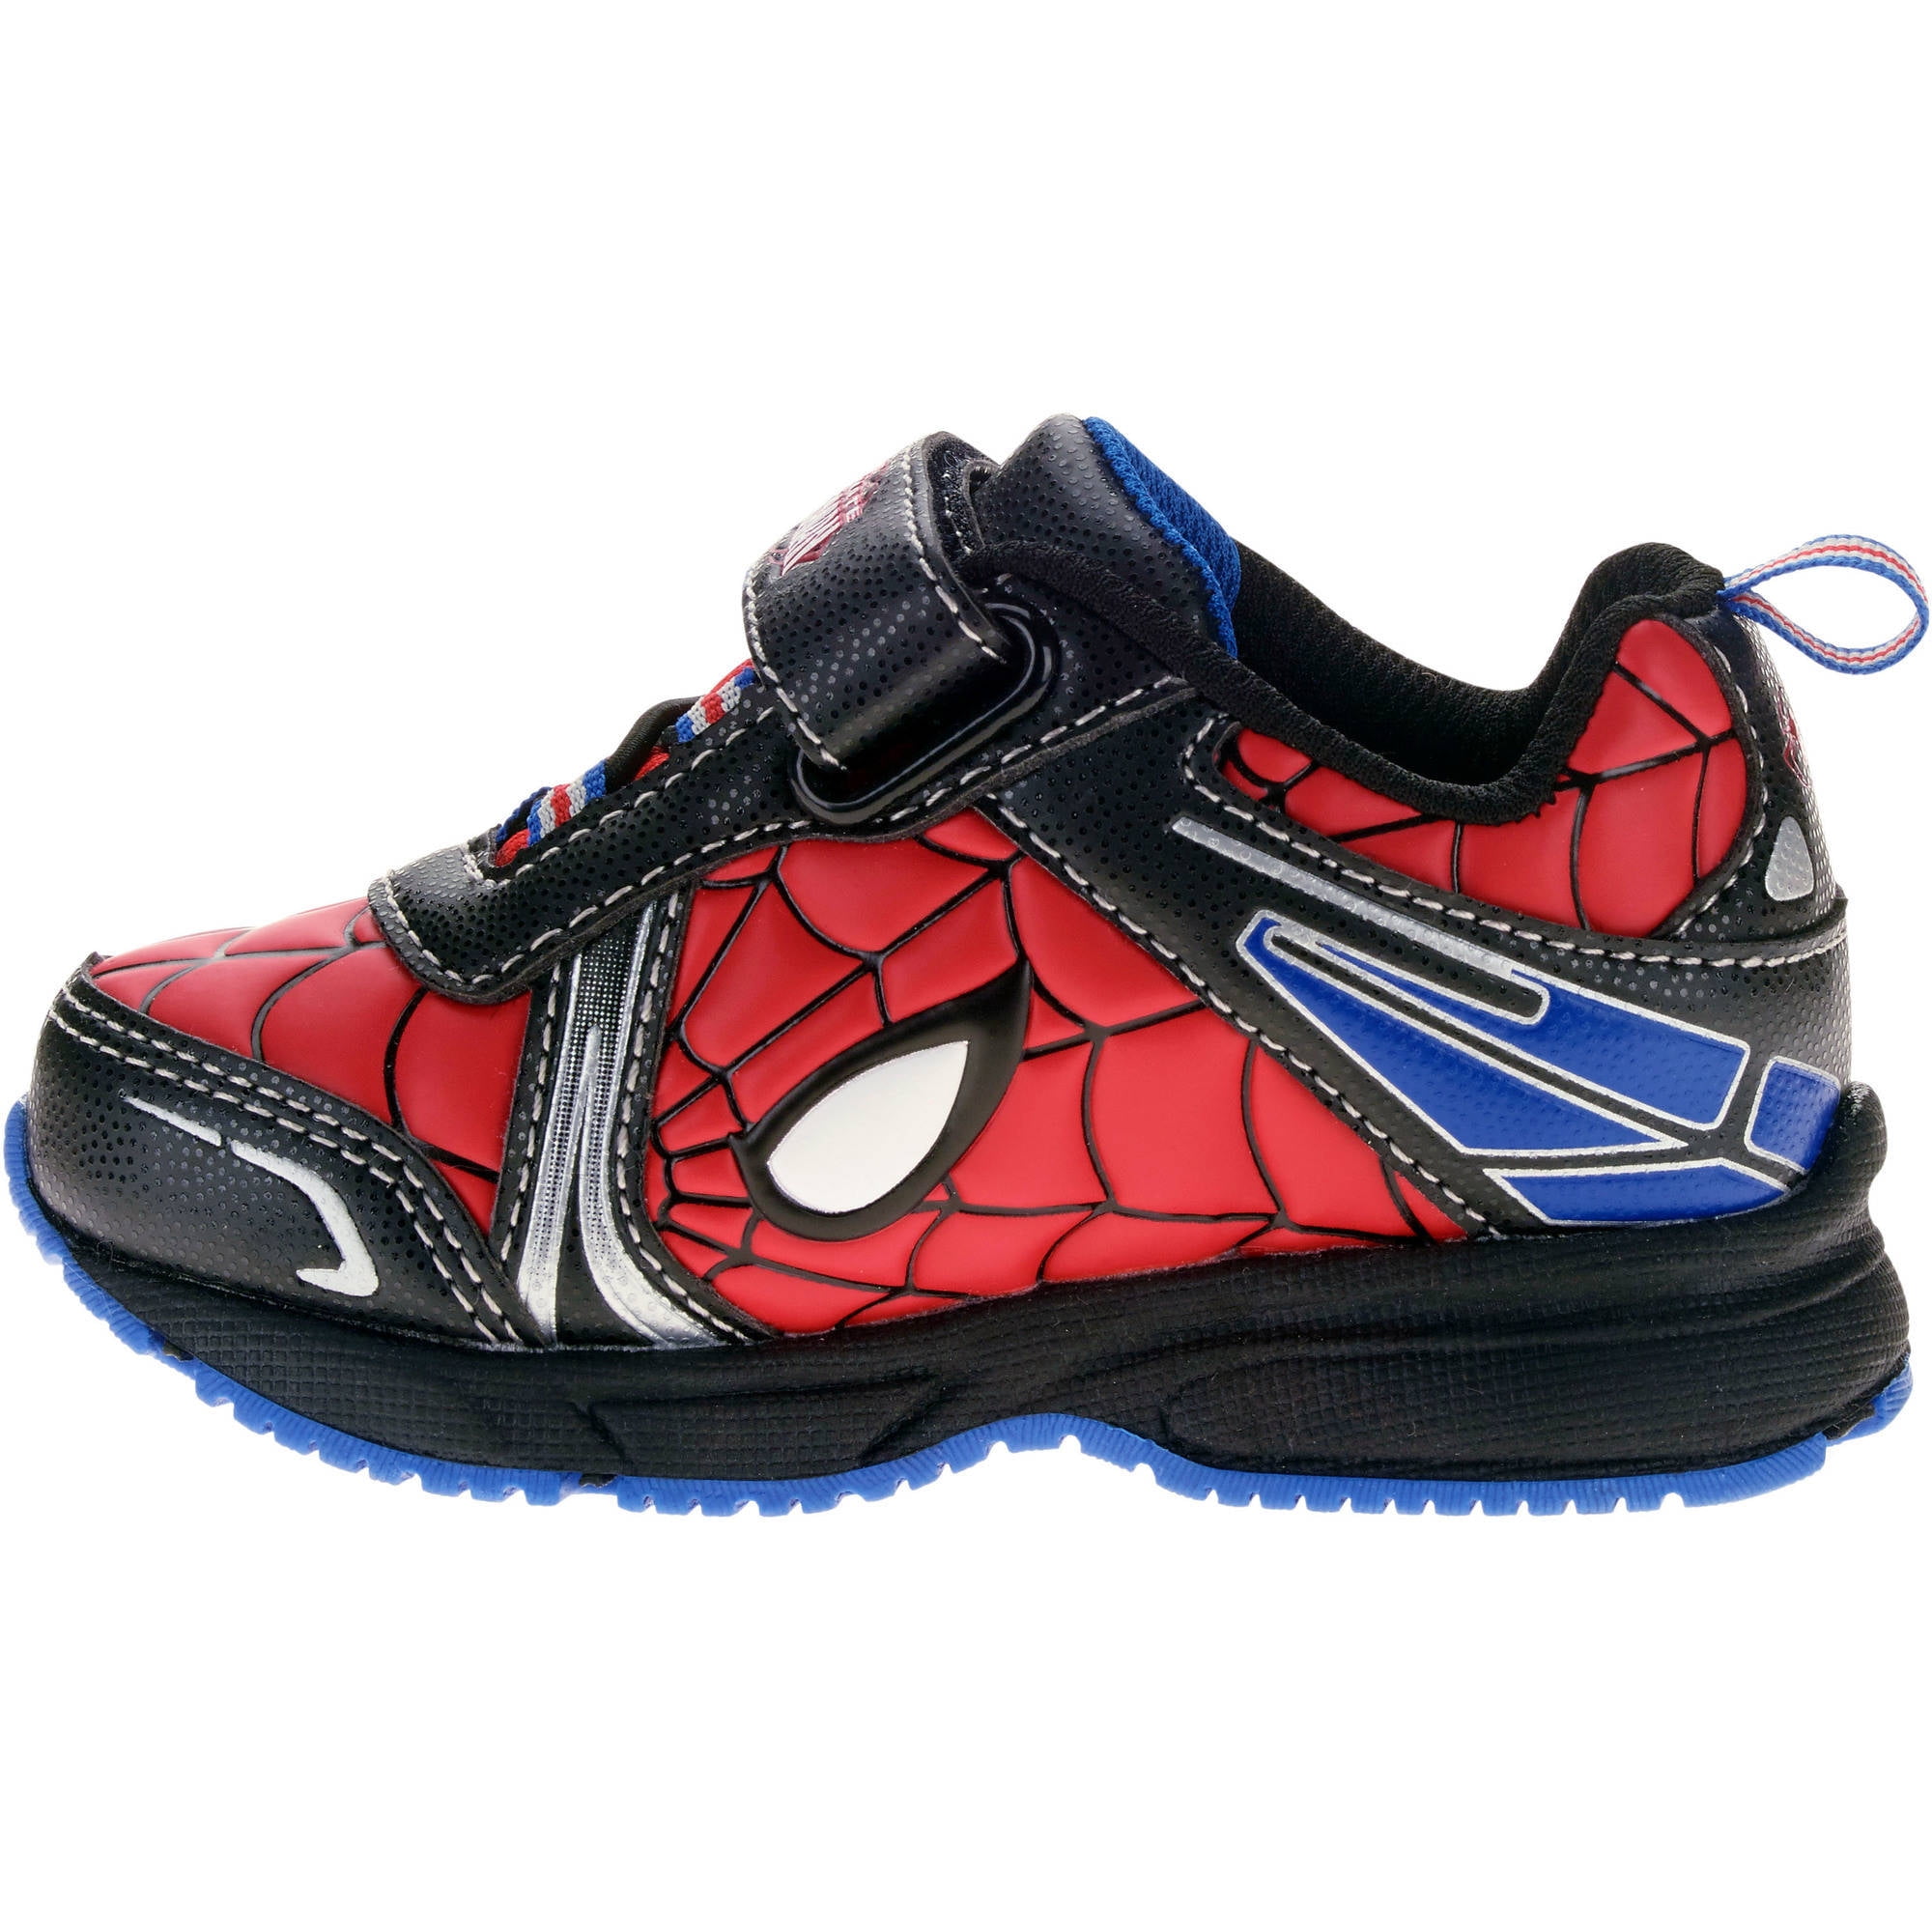 Toddler Boys Lighted Athletic Shoe 